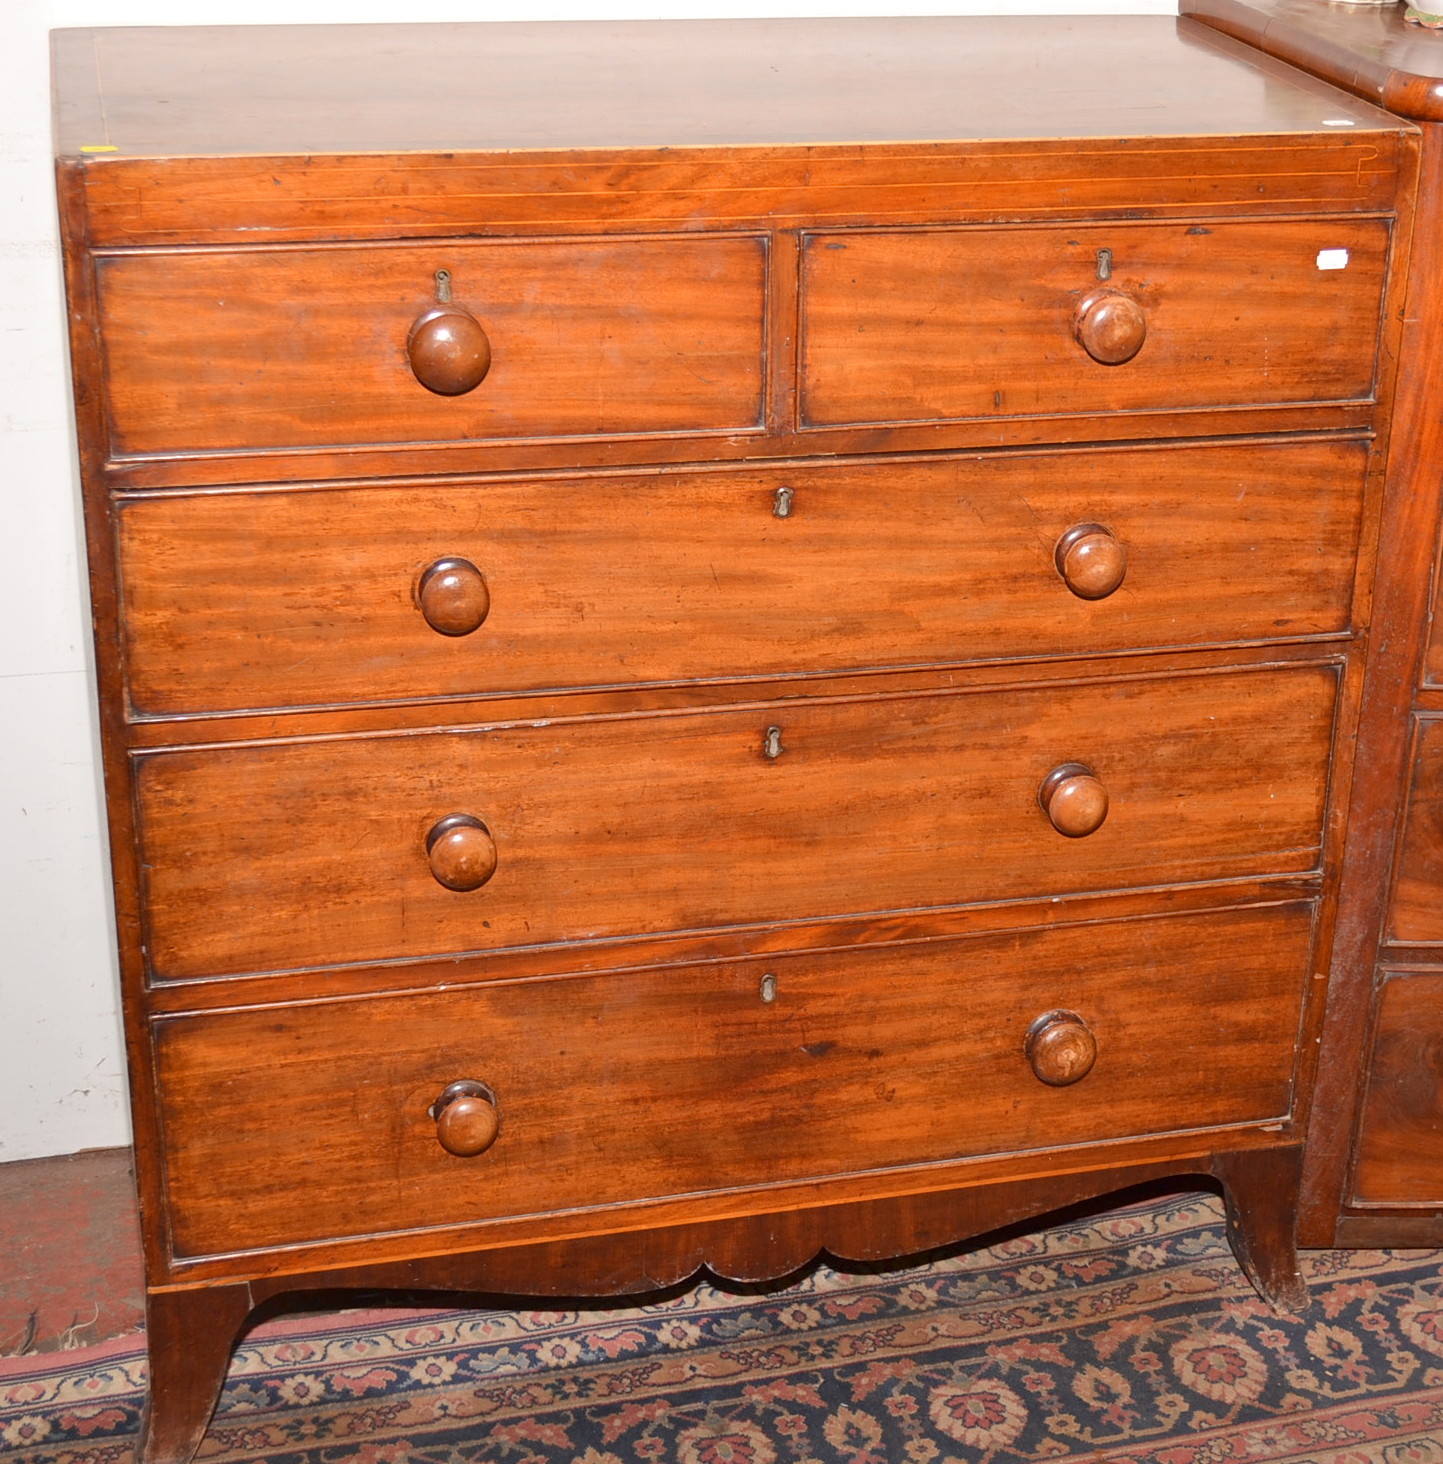 A late Georgian mahogany chest of drawers with inlaid lines on splayed bracket feet, width 101cm.